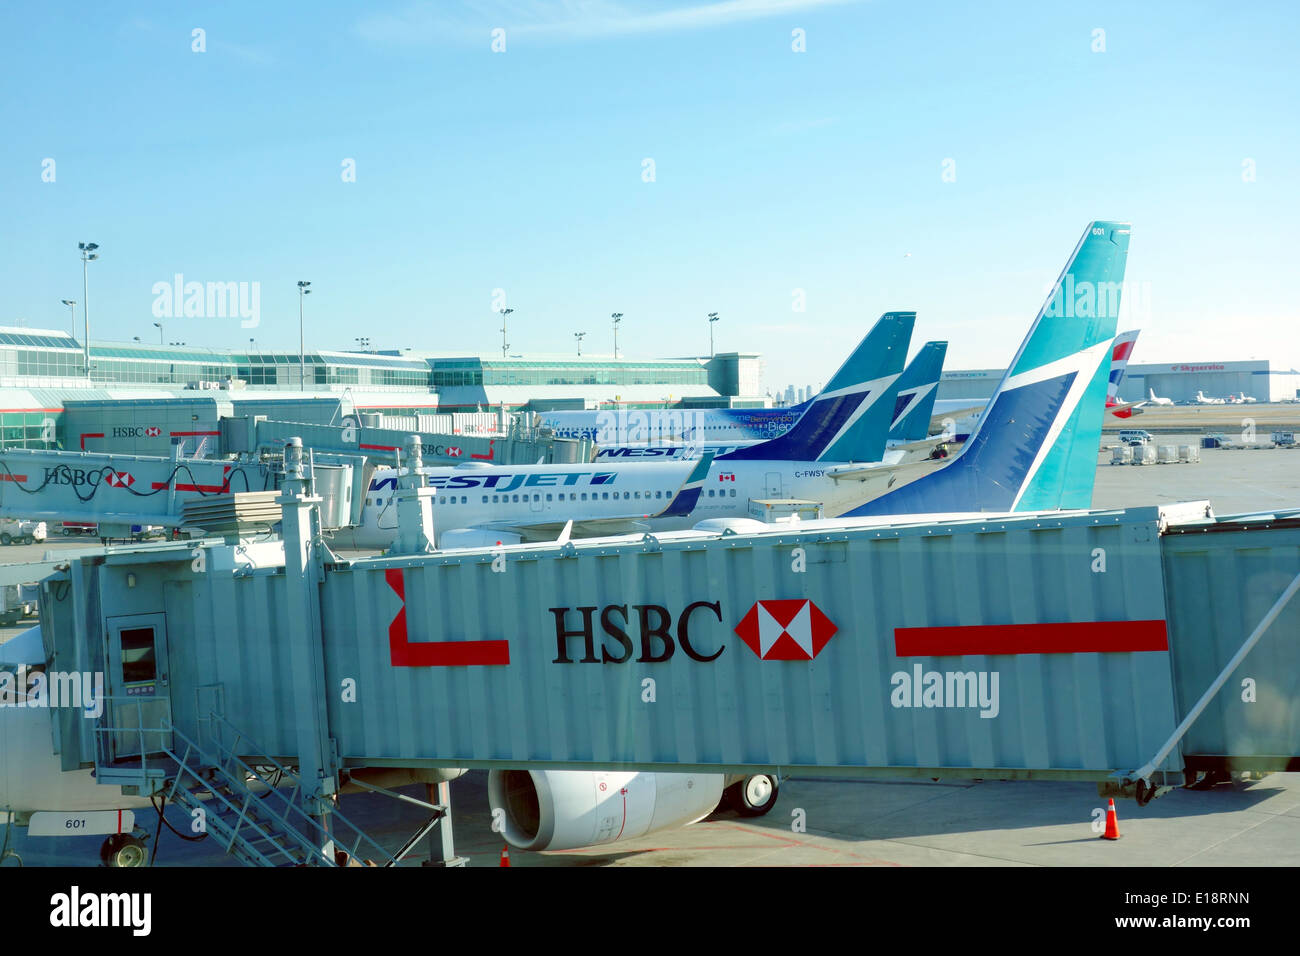 Airplanes on tarmac at the Pearson Airport in Toronto, Canada Stock Photo